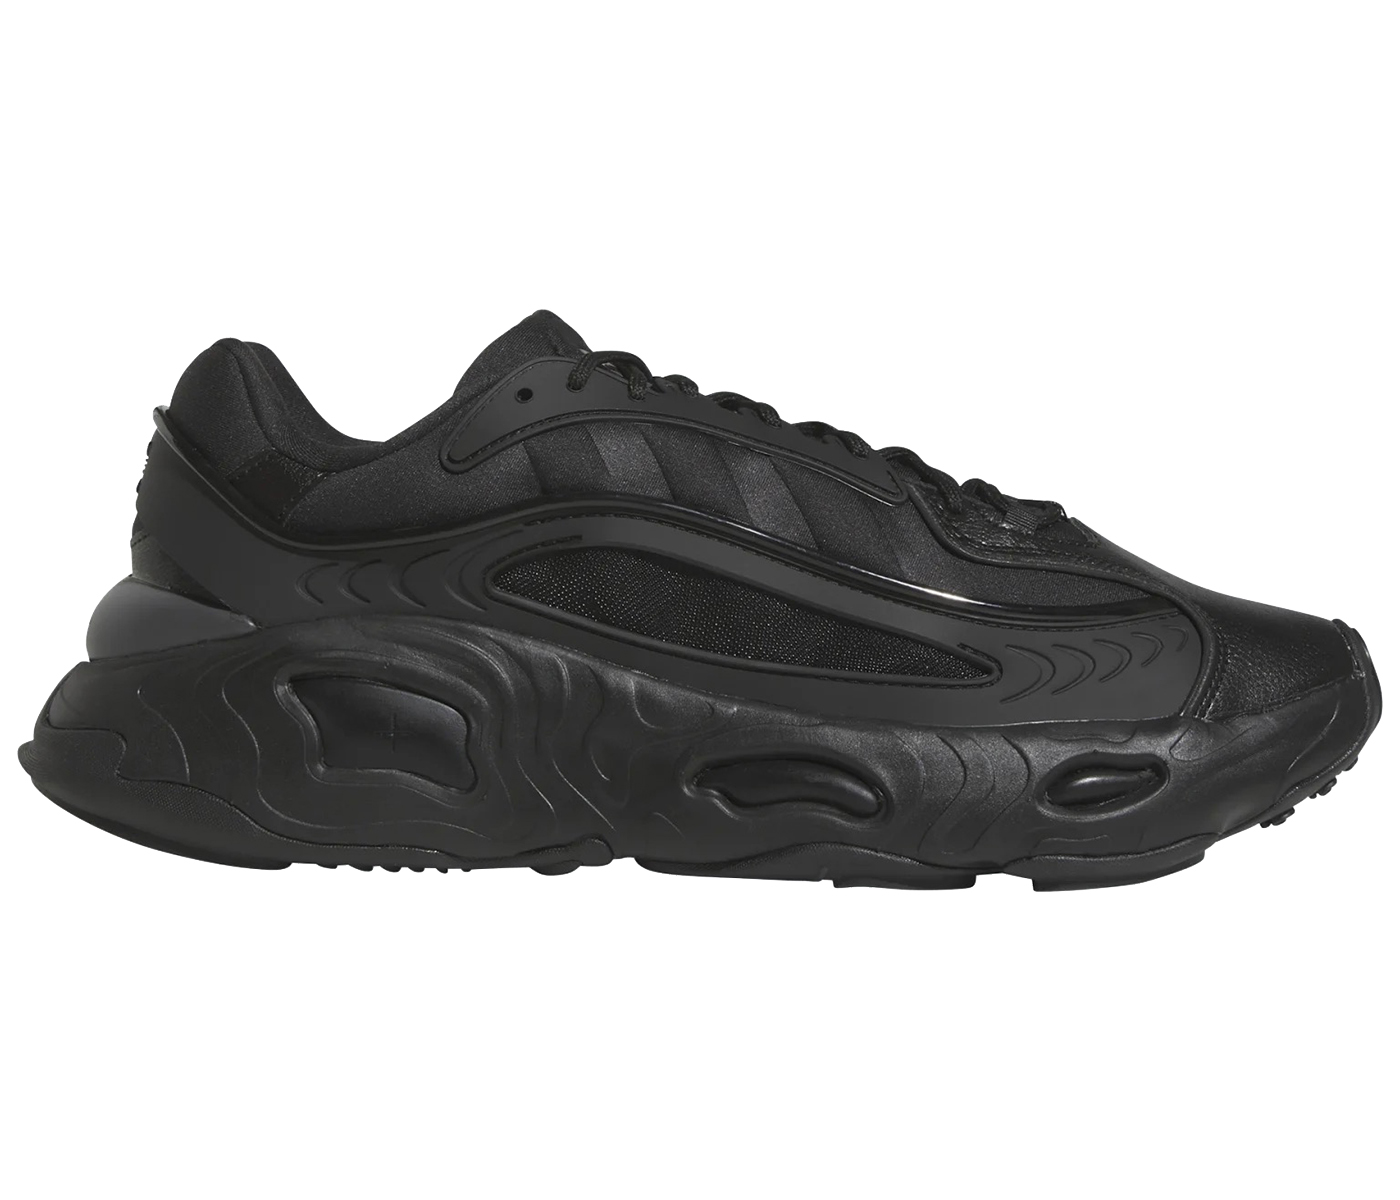 Trainers Raf Simons Adidas - Ozweego RS black and silver chunky sneakers -  EE7944